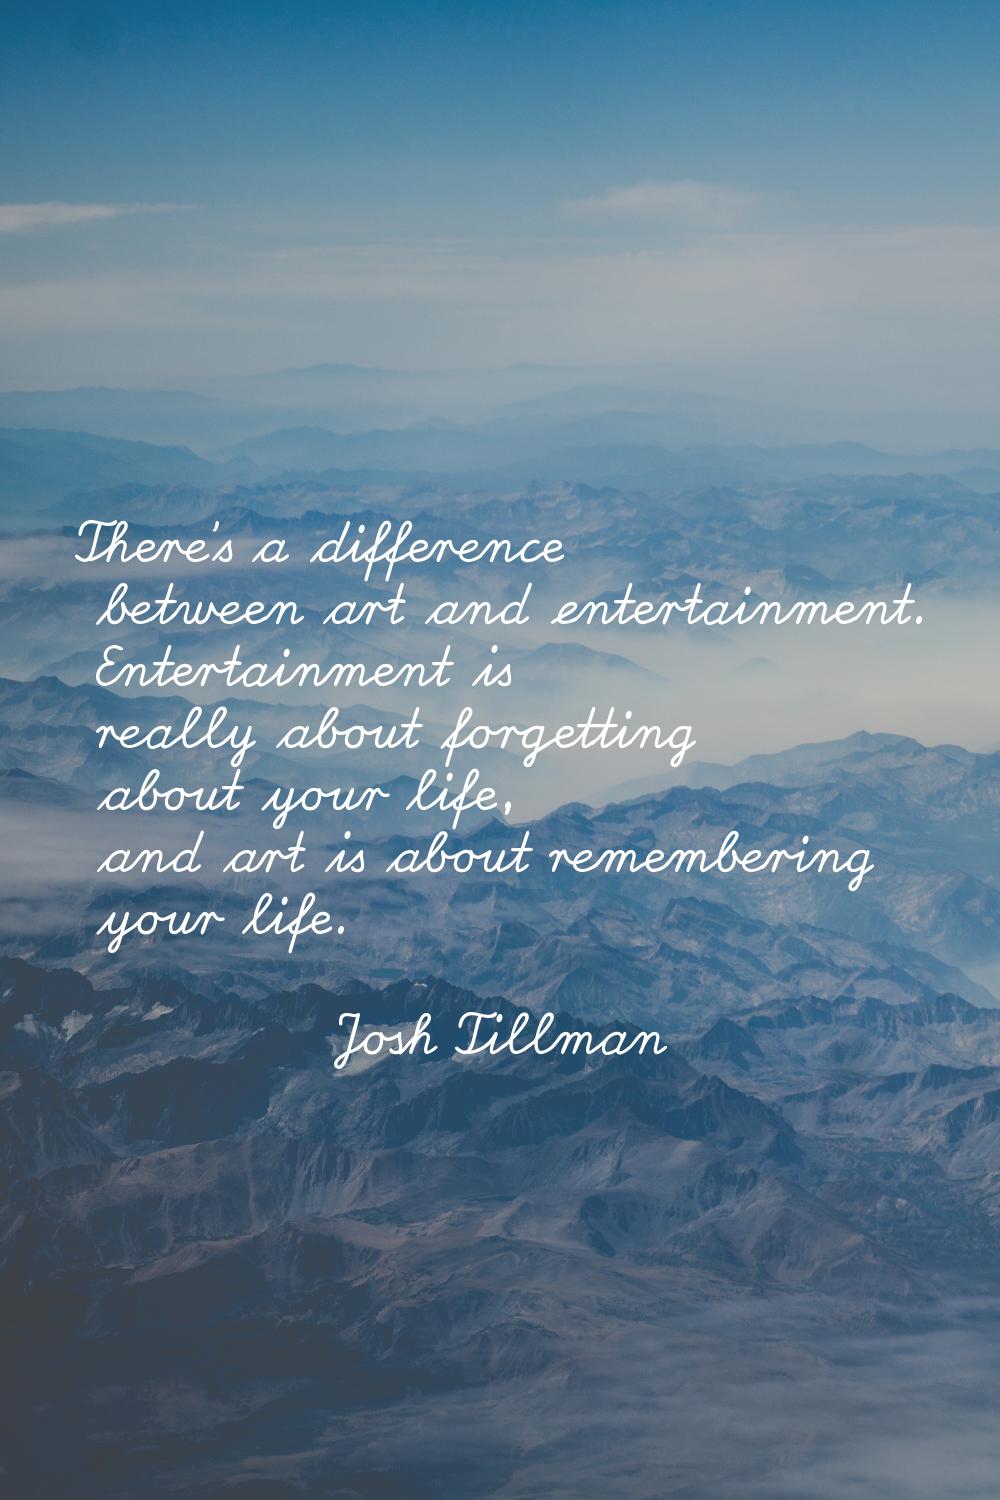 There's a difference between art and entertainment. Entertainment is really about forgetting about 